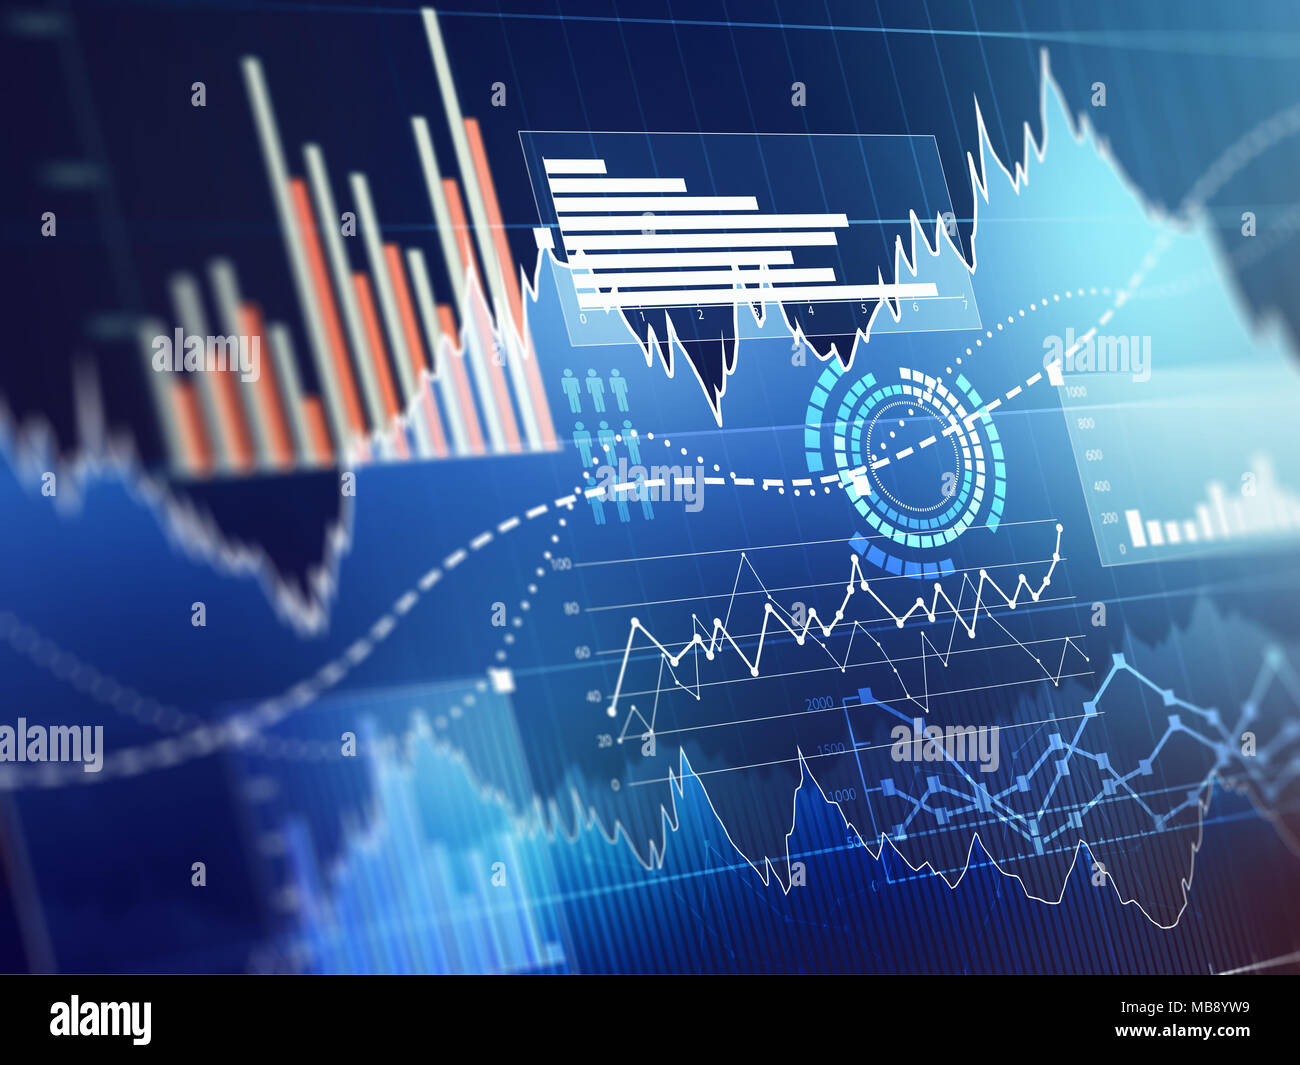 Abstract business chart with uptrend line graph, bar chart and diagram in bull market on dark blue background. Stock Photo